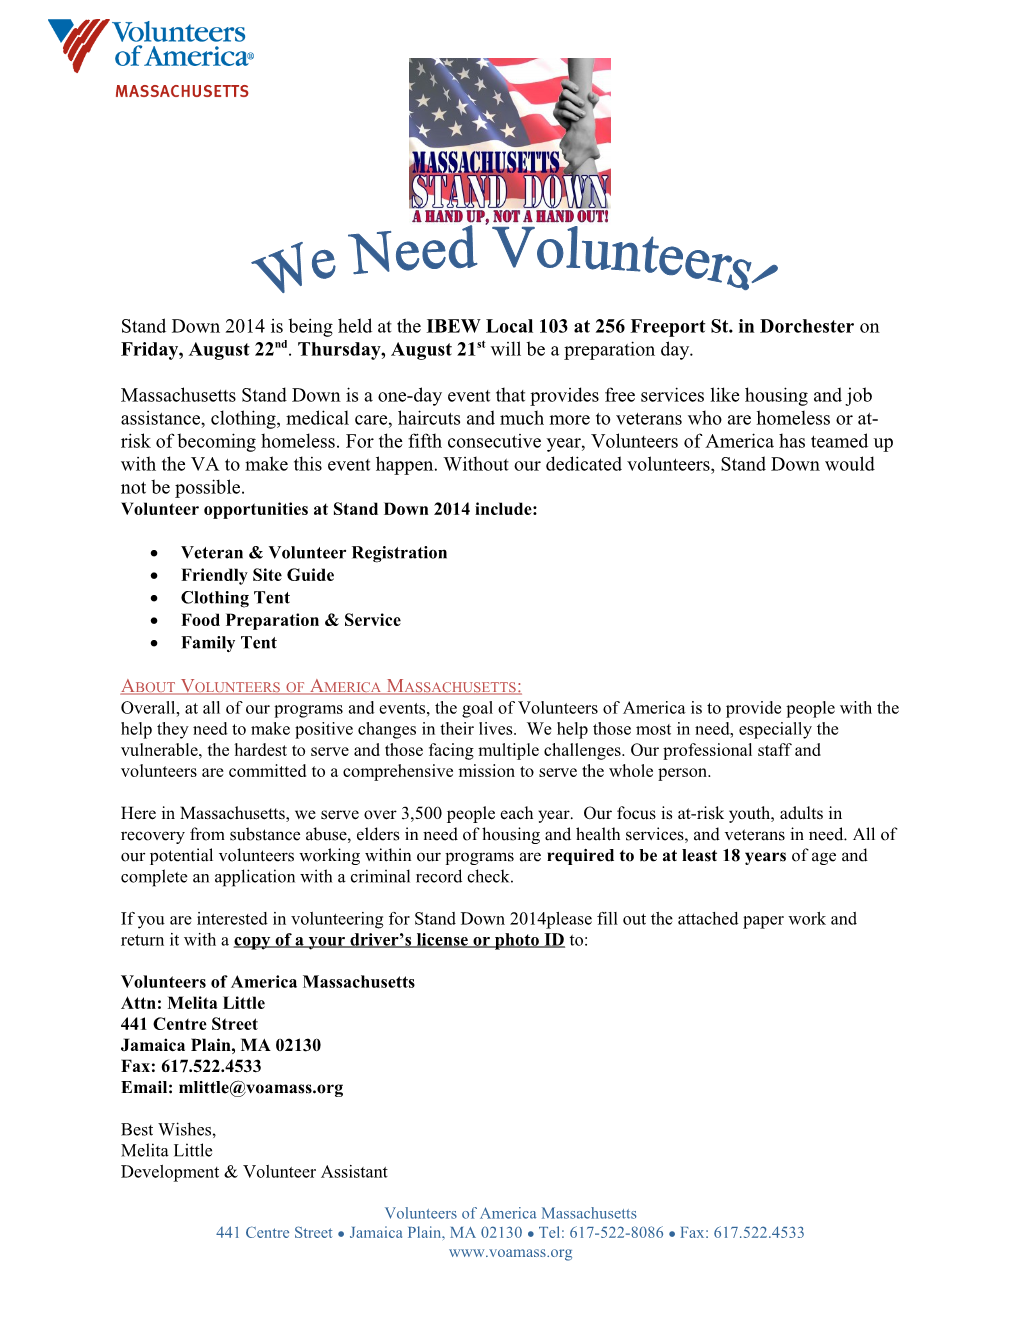 Volunteer Opportunities at Stand Down 2014 Include